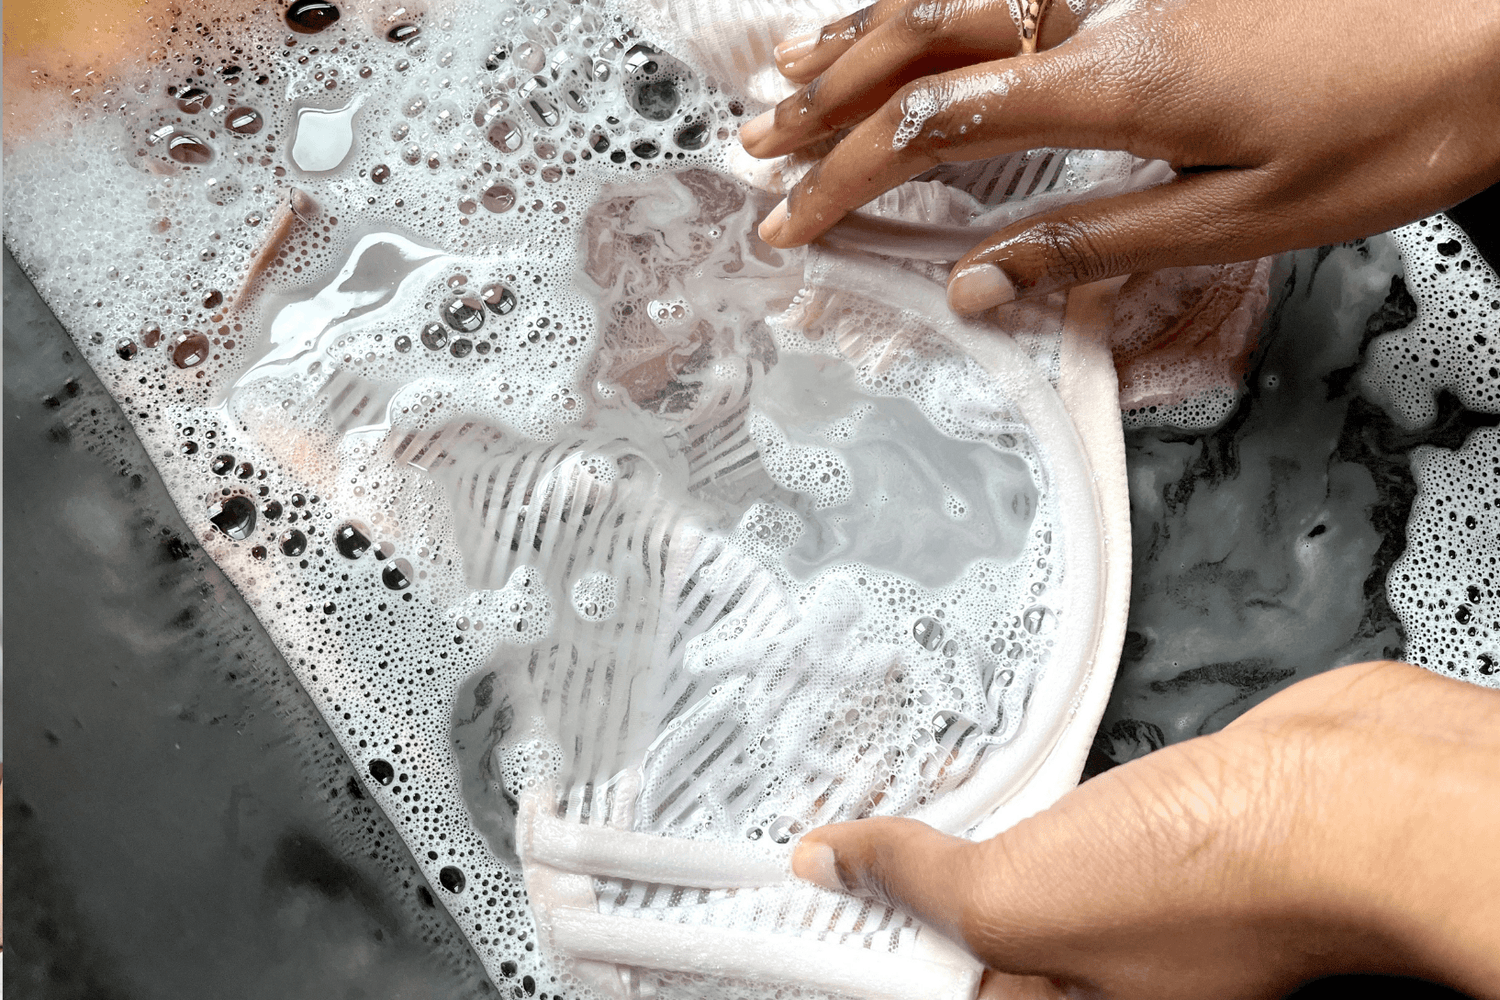 How to wash and care for your Beija bras